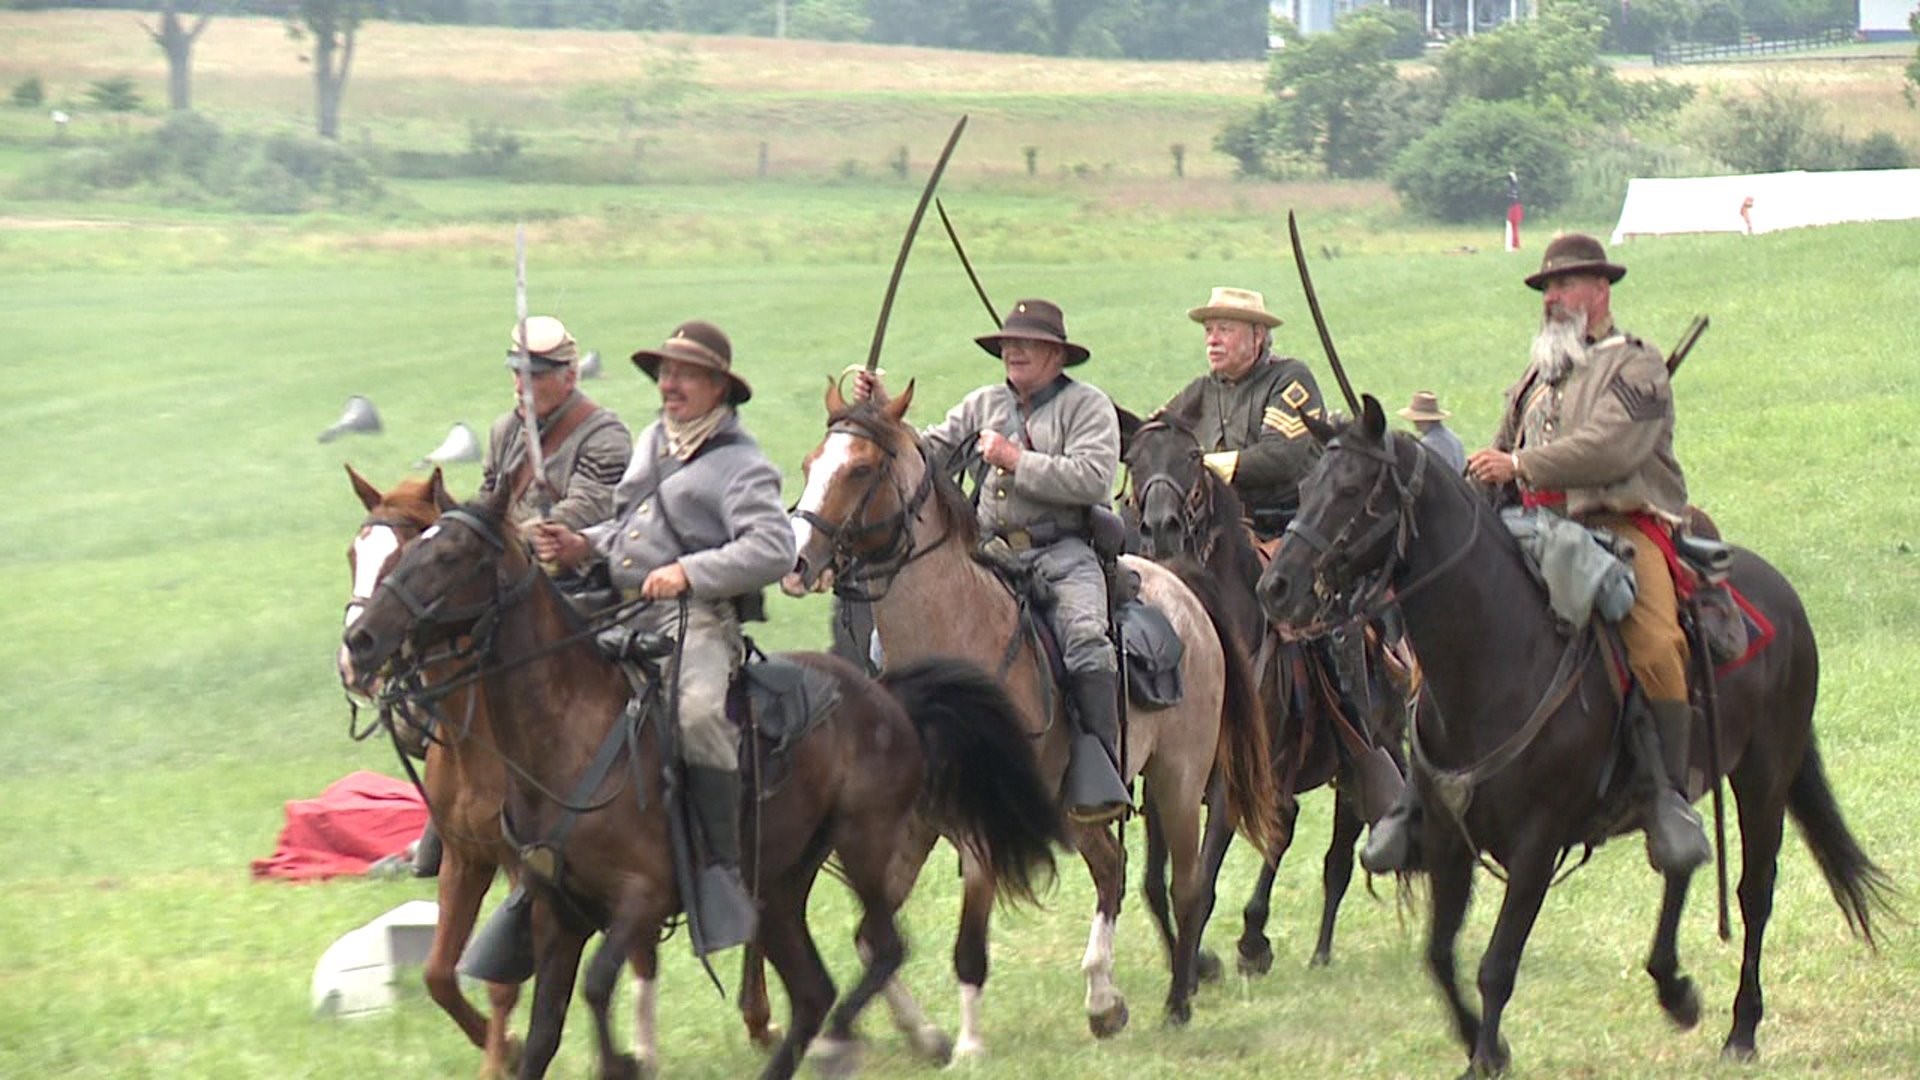 The Gettysburg National Military Park is commemorating the 160th anniversary of the Battle of Gettysburg with walking tours, talks and reenactments this weekend.